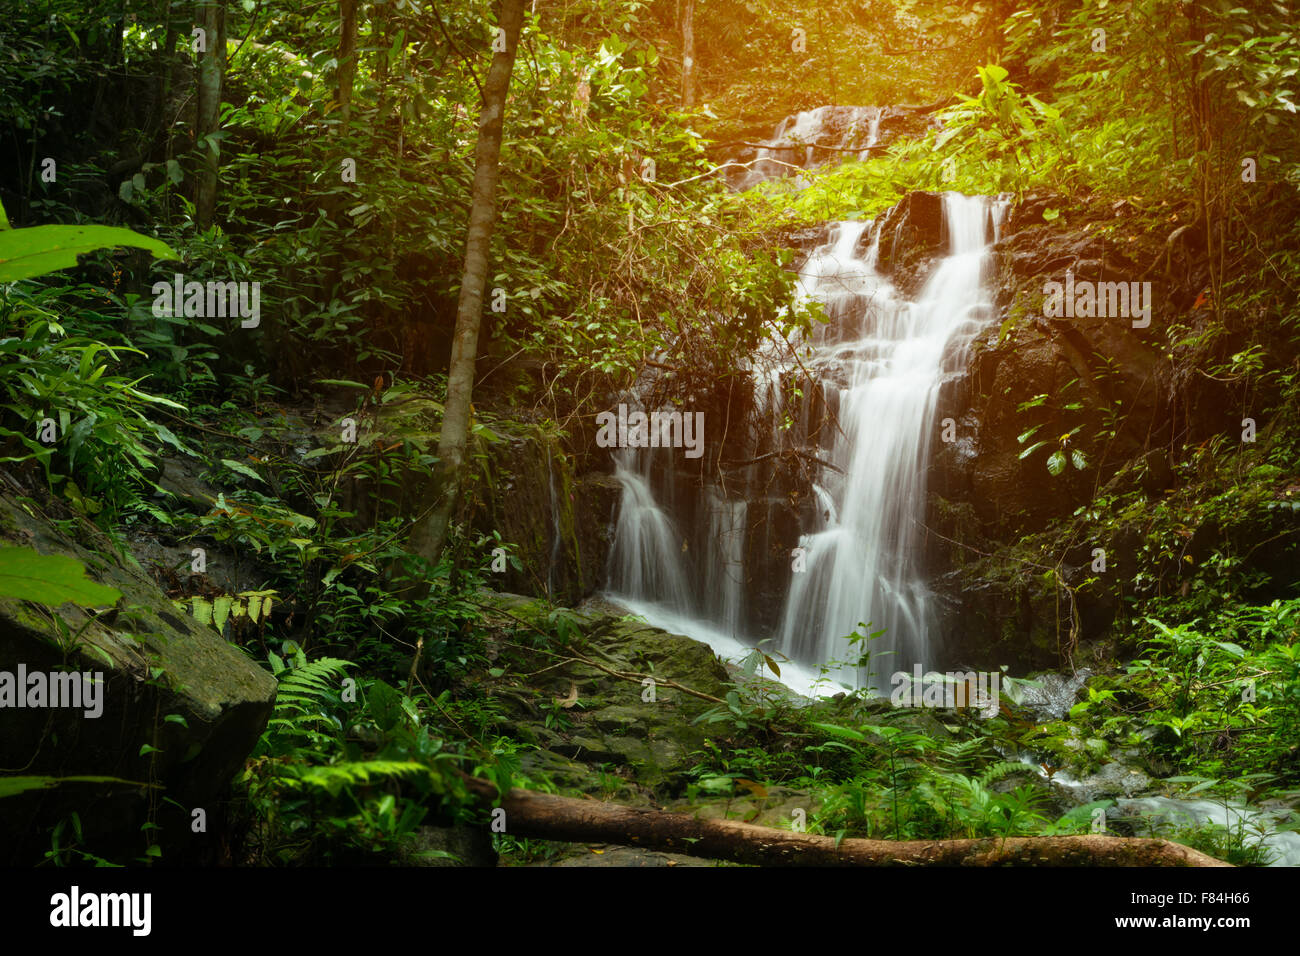 Natural flowing waterfall in a lush tranquil rain-forest. Stock Photo